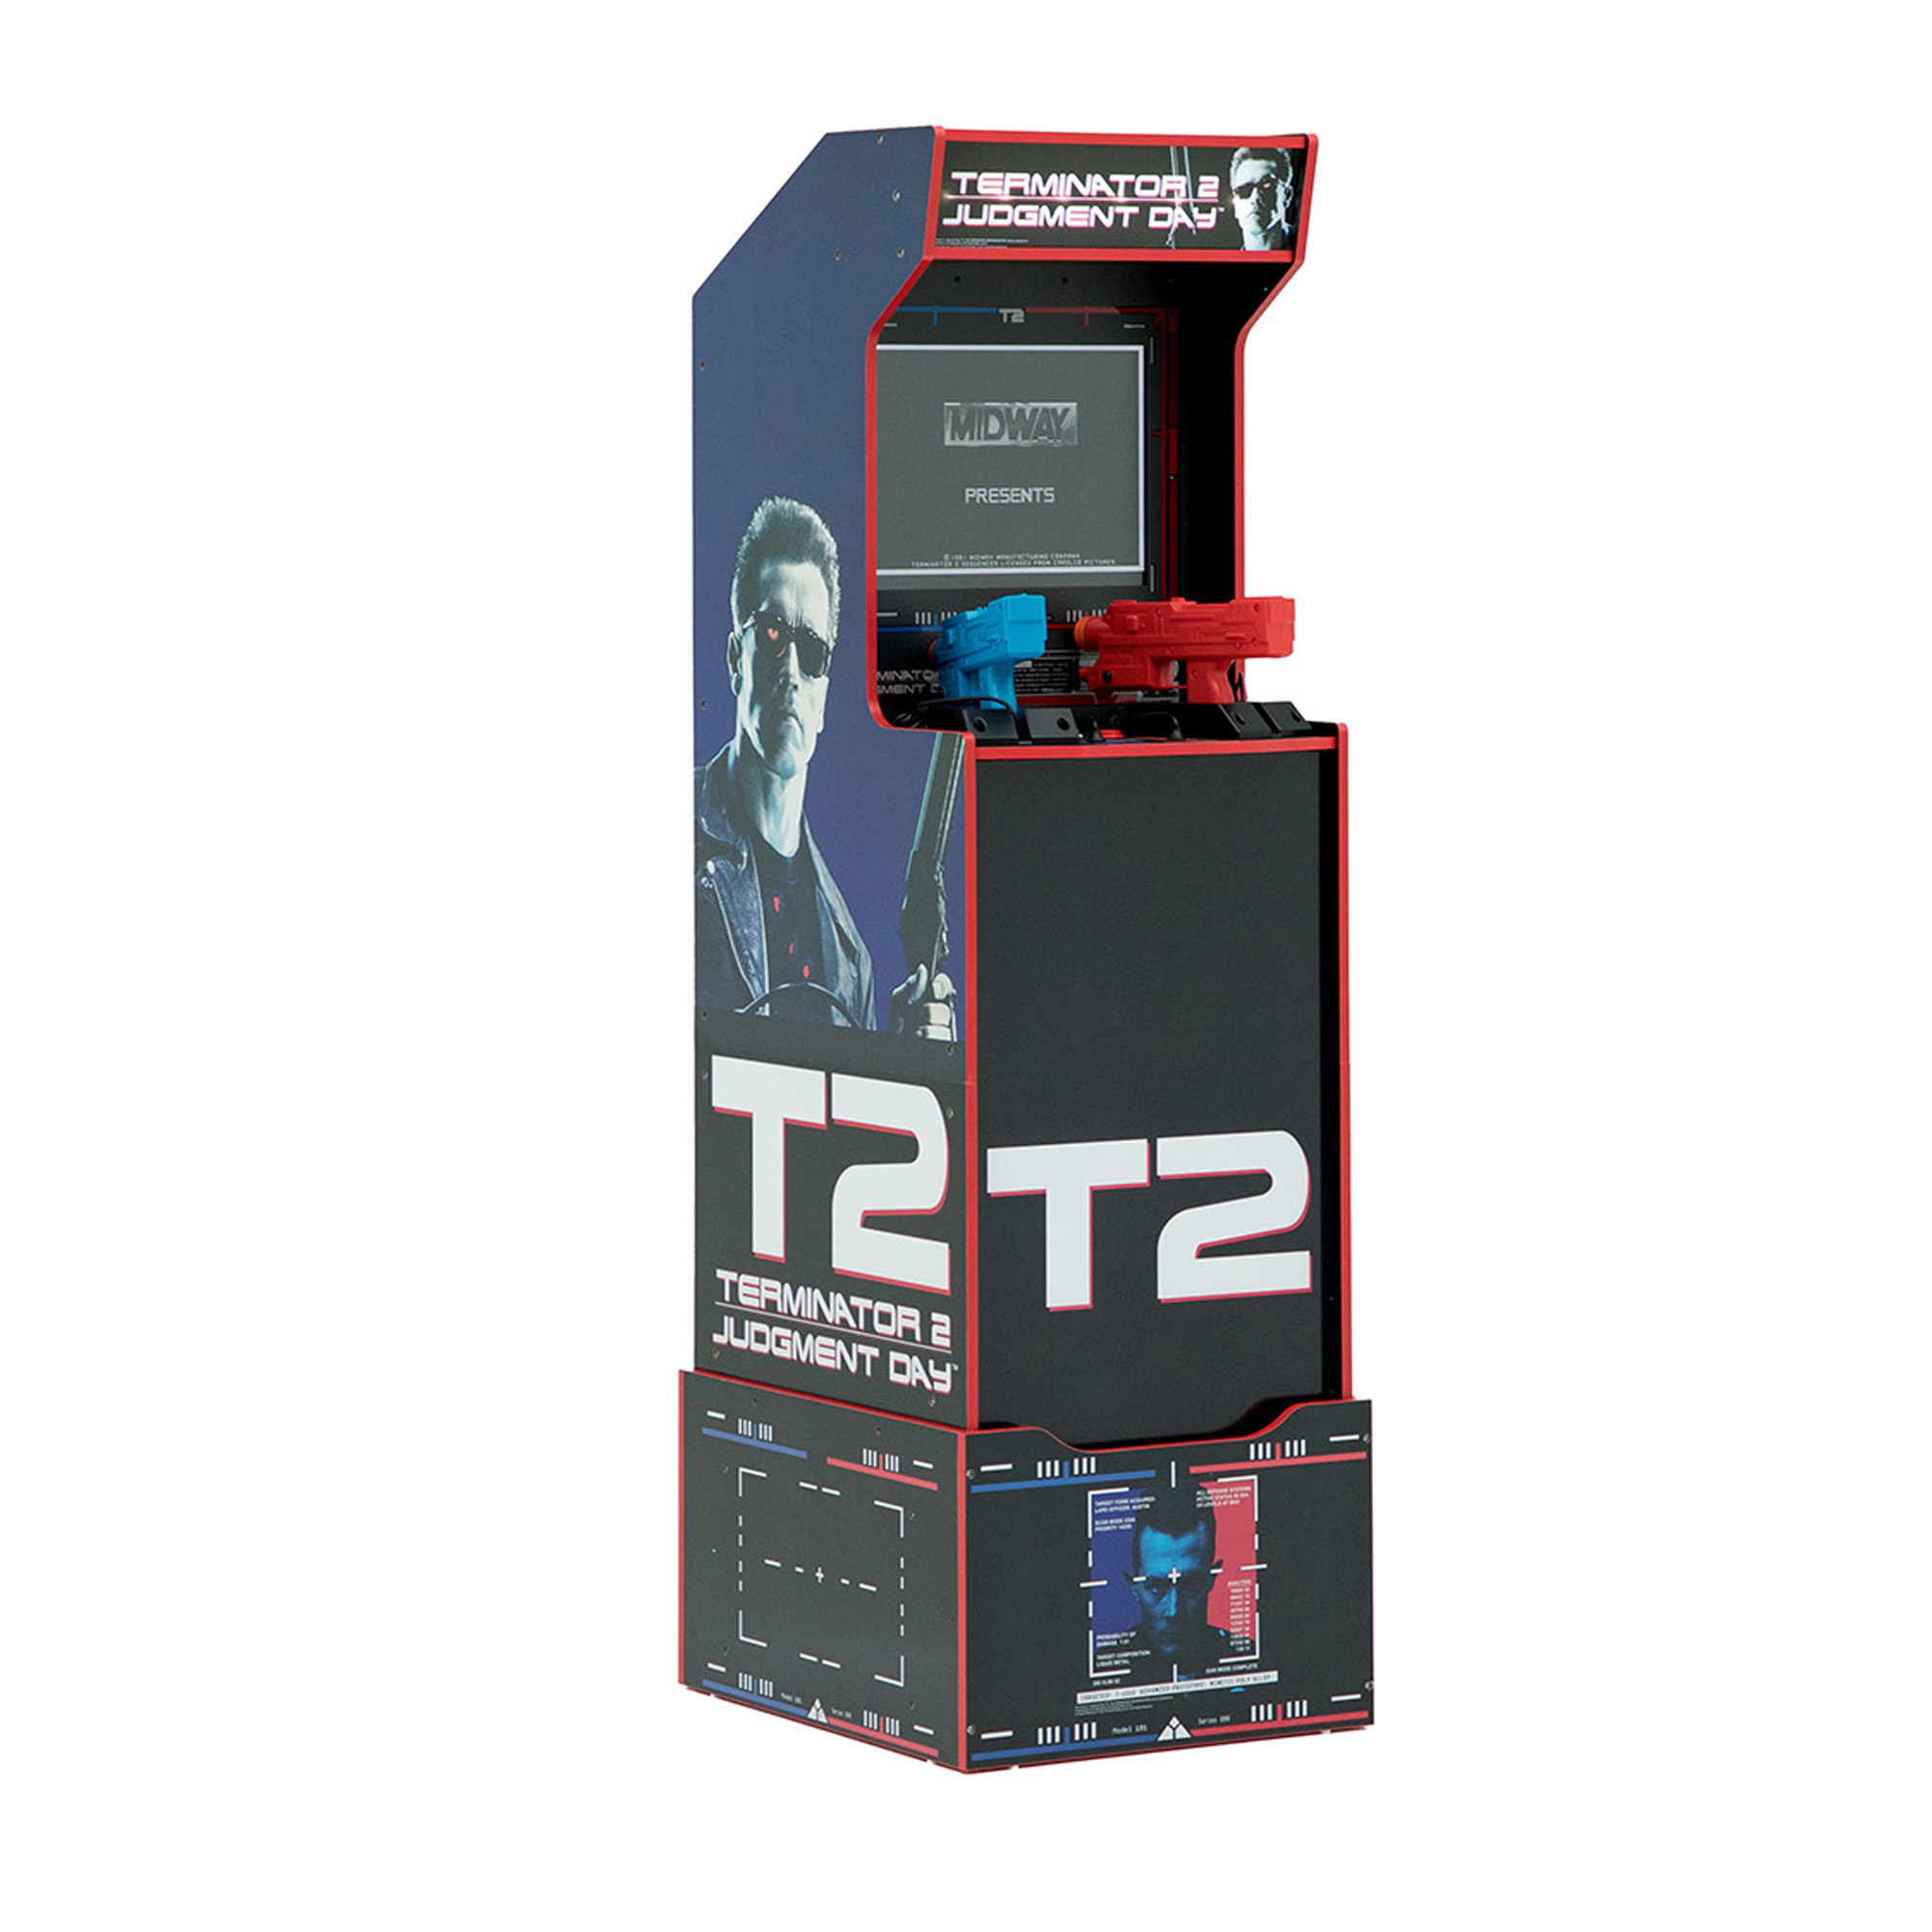 Arcade1Up - Terminator 2: Judgment Day With Riser and Lit Marquee, Arcade Game Machine - image 4 of 13